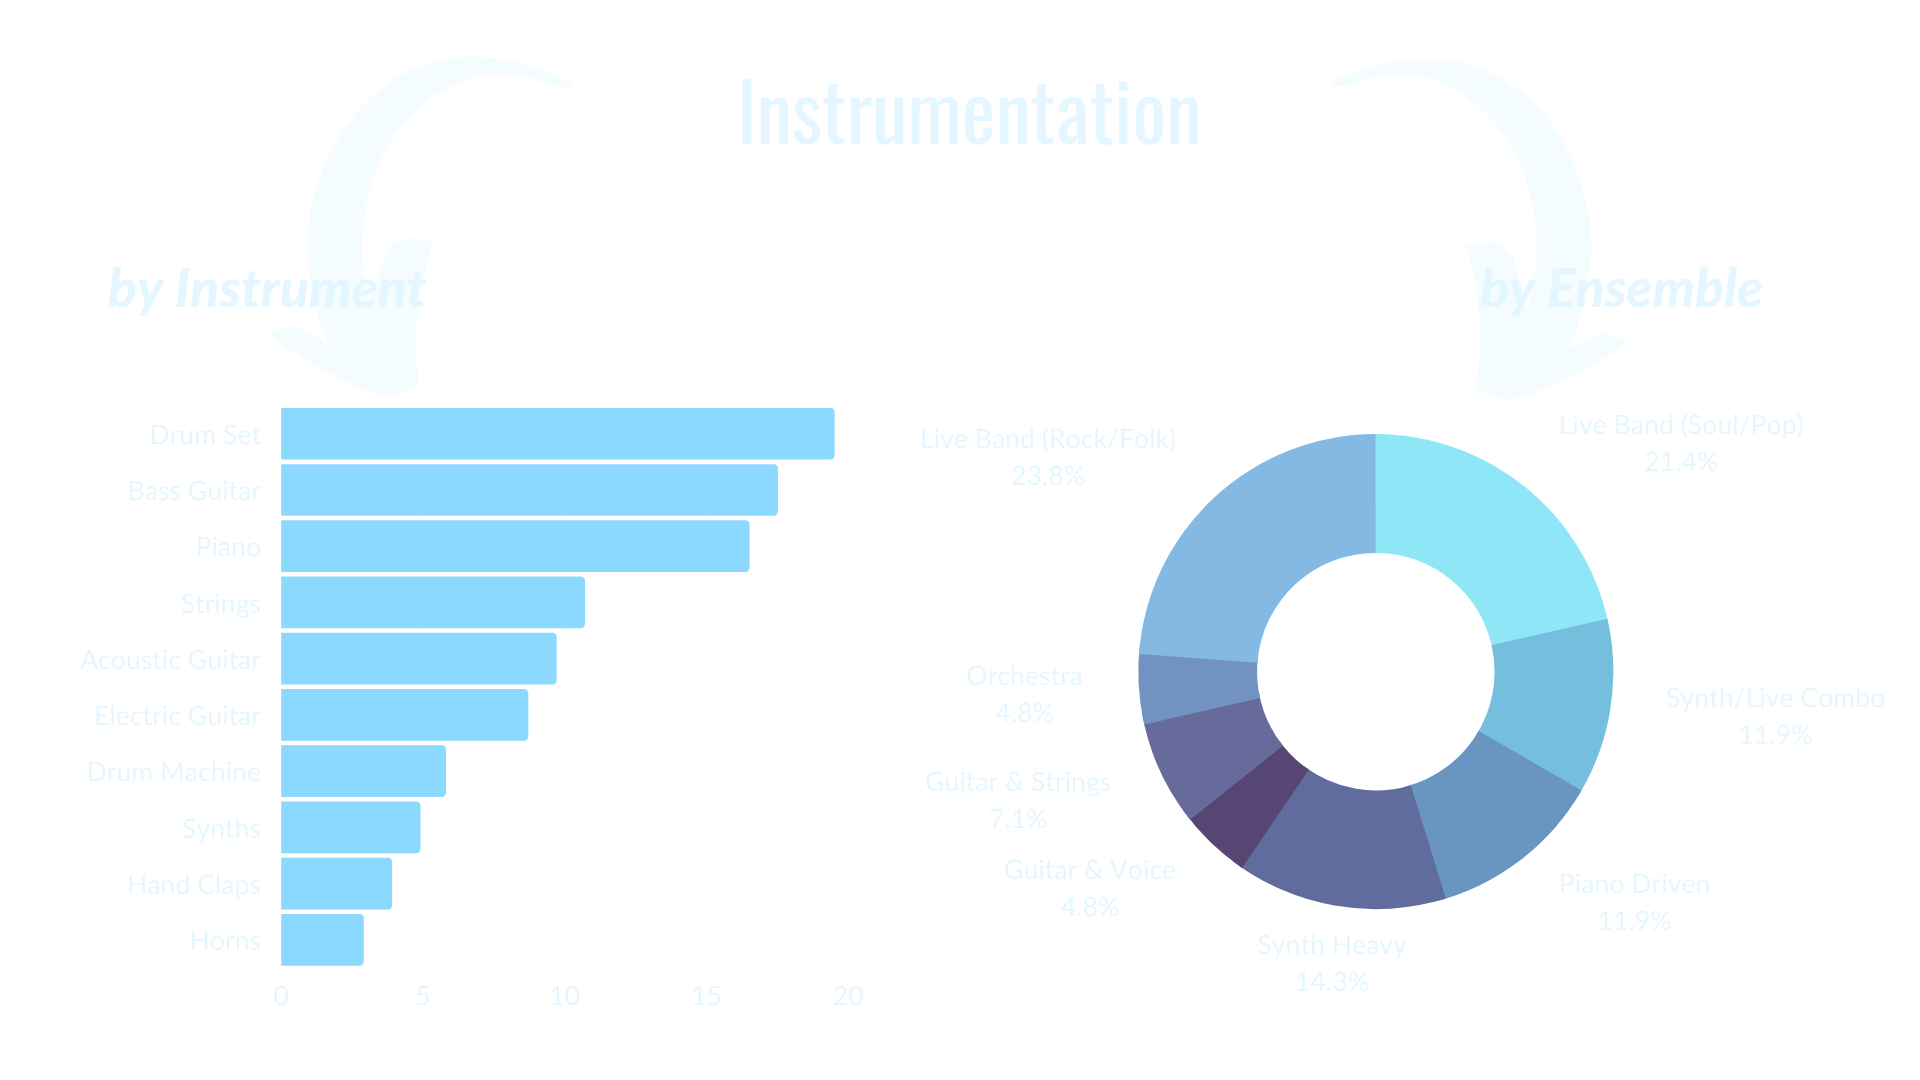 This image shows two charts depicting the most common instrumentation found in "Inspirational" tracks based on data compiled from February 2021 to June 2021. On the left, this is shown by instrument in a pale blue bar chart. In order, the most popular instruments are: 1. Drum Set 2. Bass Guitar 3. Piano 4. Strings 5. Acoustic Guitar 6. Electric Guitar 7. Drum Machine 8. Synthesizers 9. Hand Claps 10. Horns. On the right, this is depicted by ensemble with a pie chart: 23.8% of briefs requested Live Band (Rock/Folk), 21.4% Live Band (Soul/Pop), 14.3% Synth Heavy, 11.9% Synth/Live Combo, 11.9% Piano Driven, 7.1% Guitar & Strings, 4.8% Guitar & Voice, and 4.8% Orchestral.